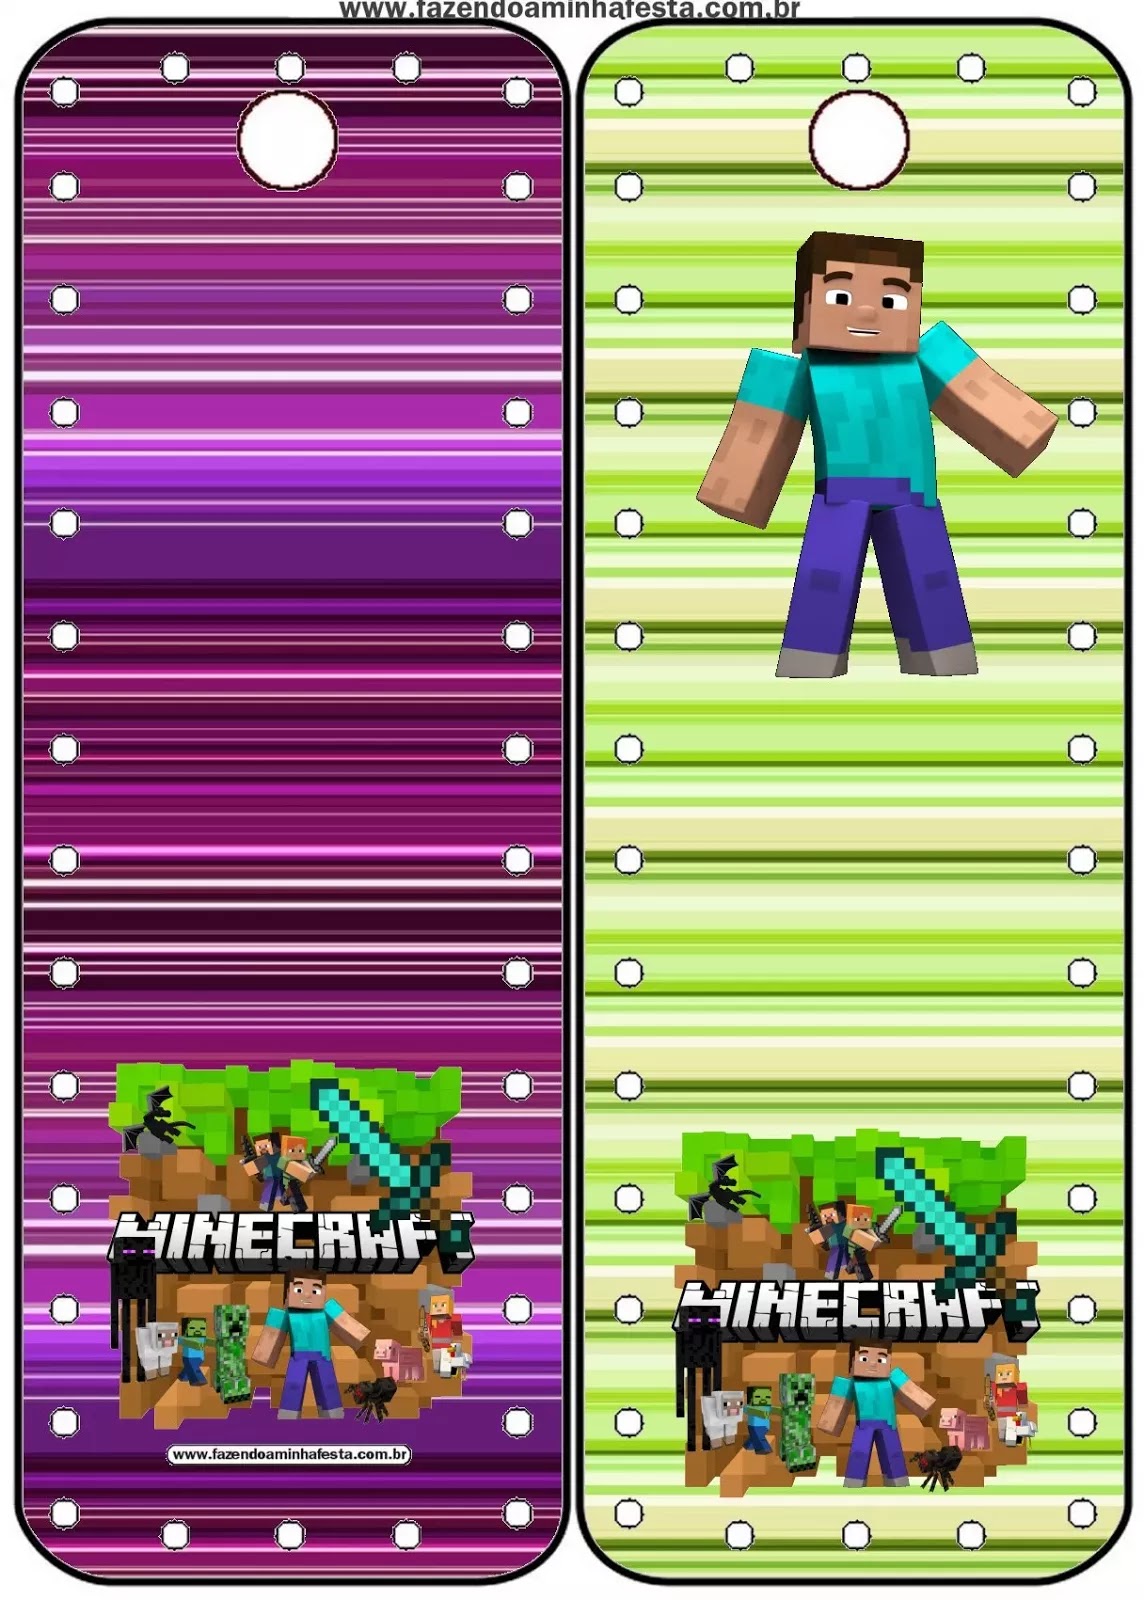 Minecraft Birthday Free Party Printables. - Oh My Fiesta! for Geeks